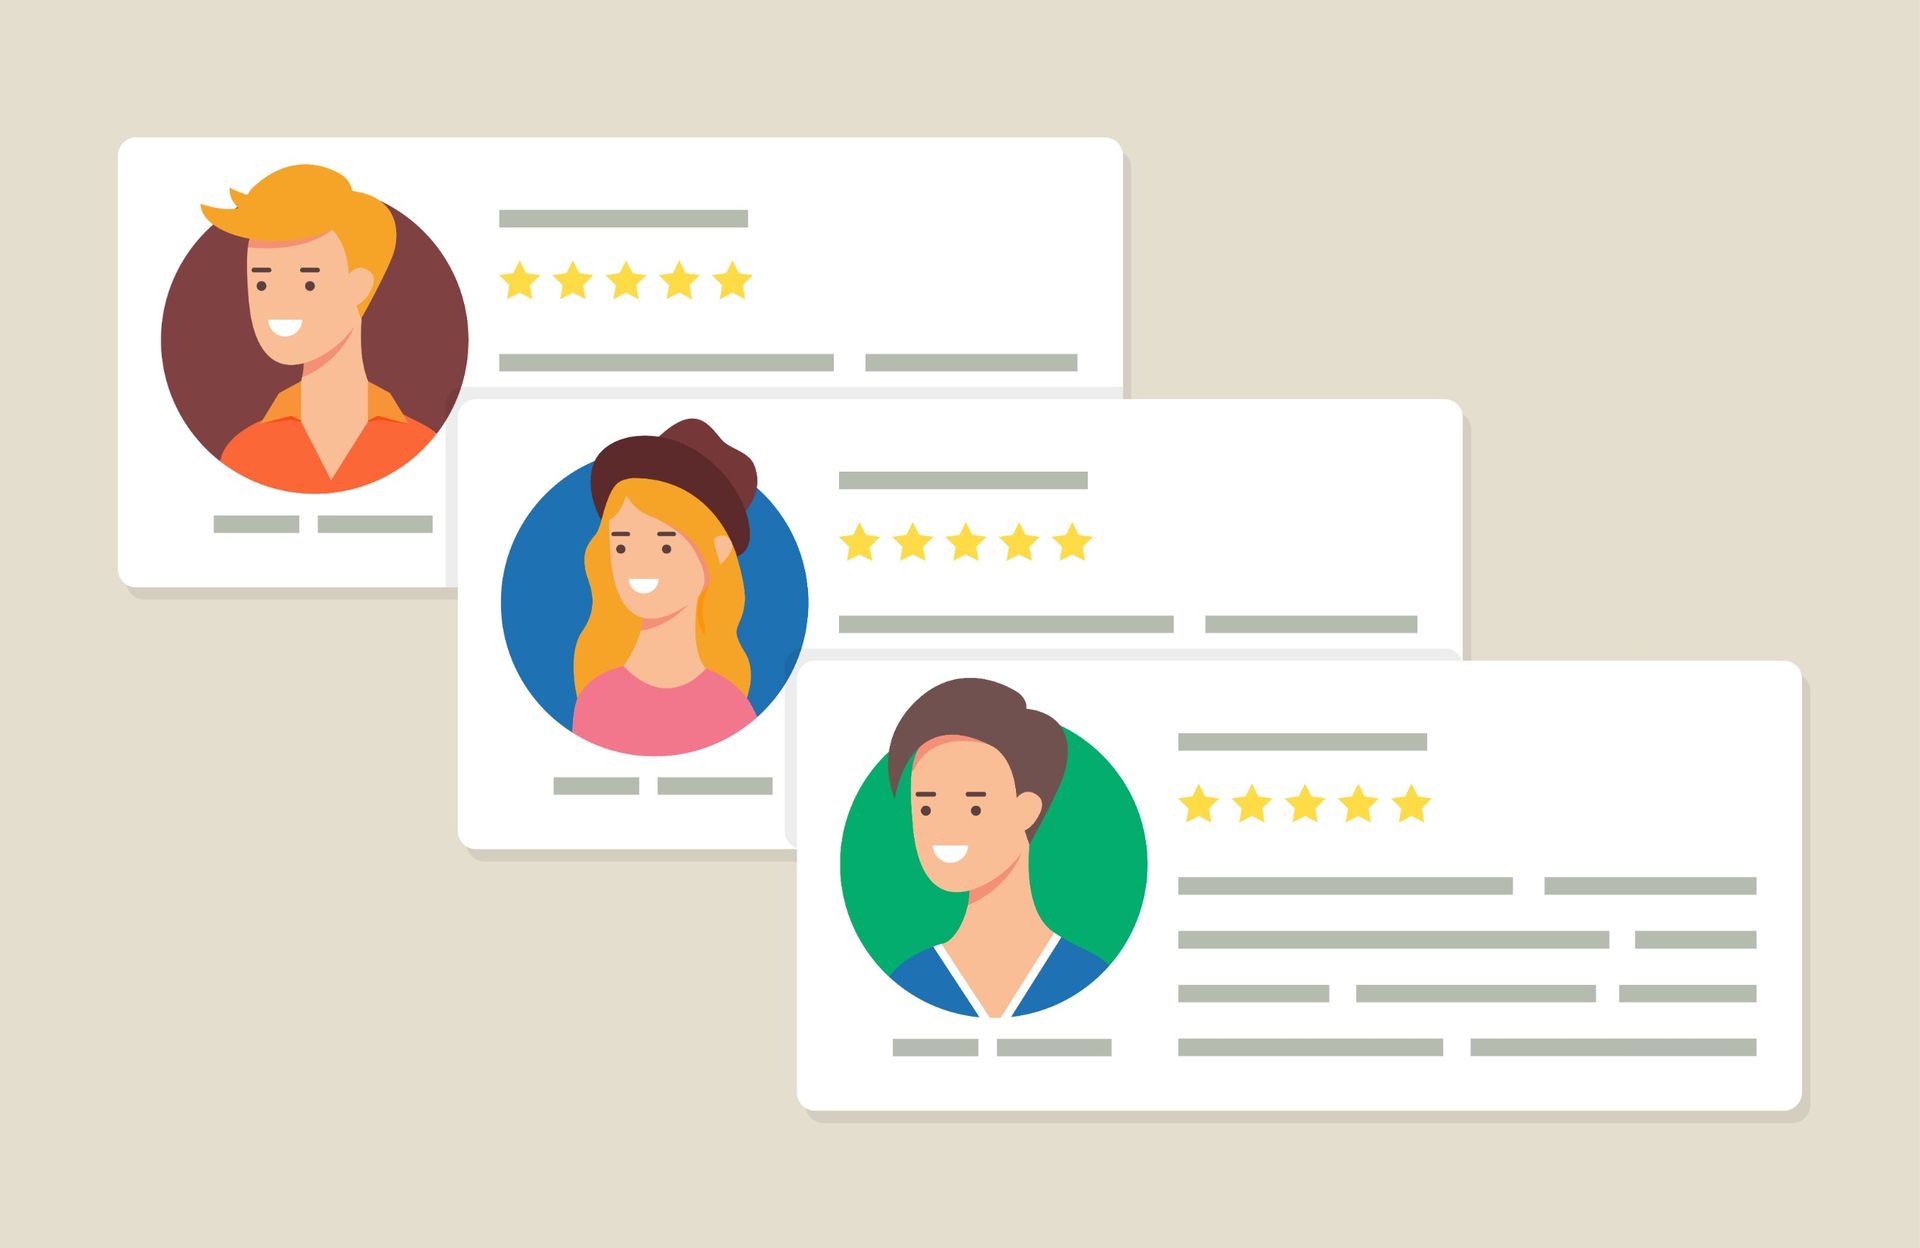 How To Get Great Online Reviews for Your Business - 4 Best Practices